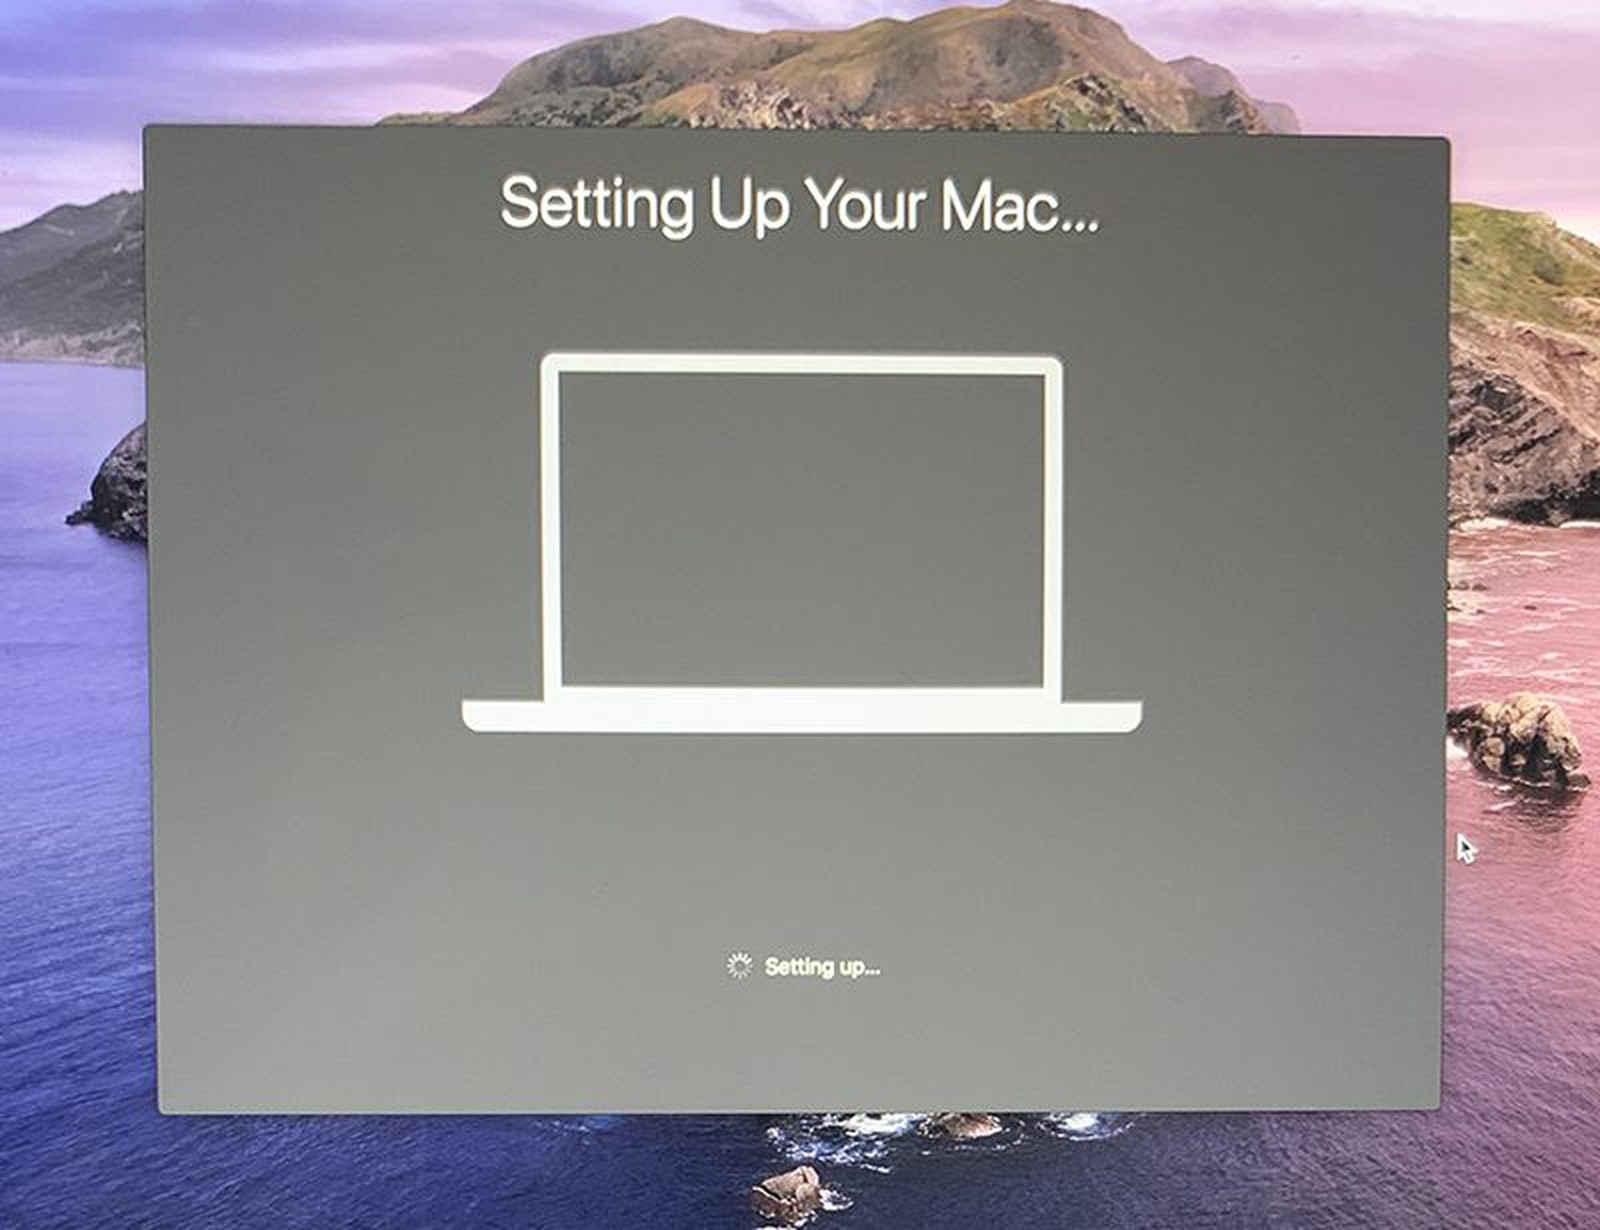 why is macos catalina not downloading